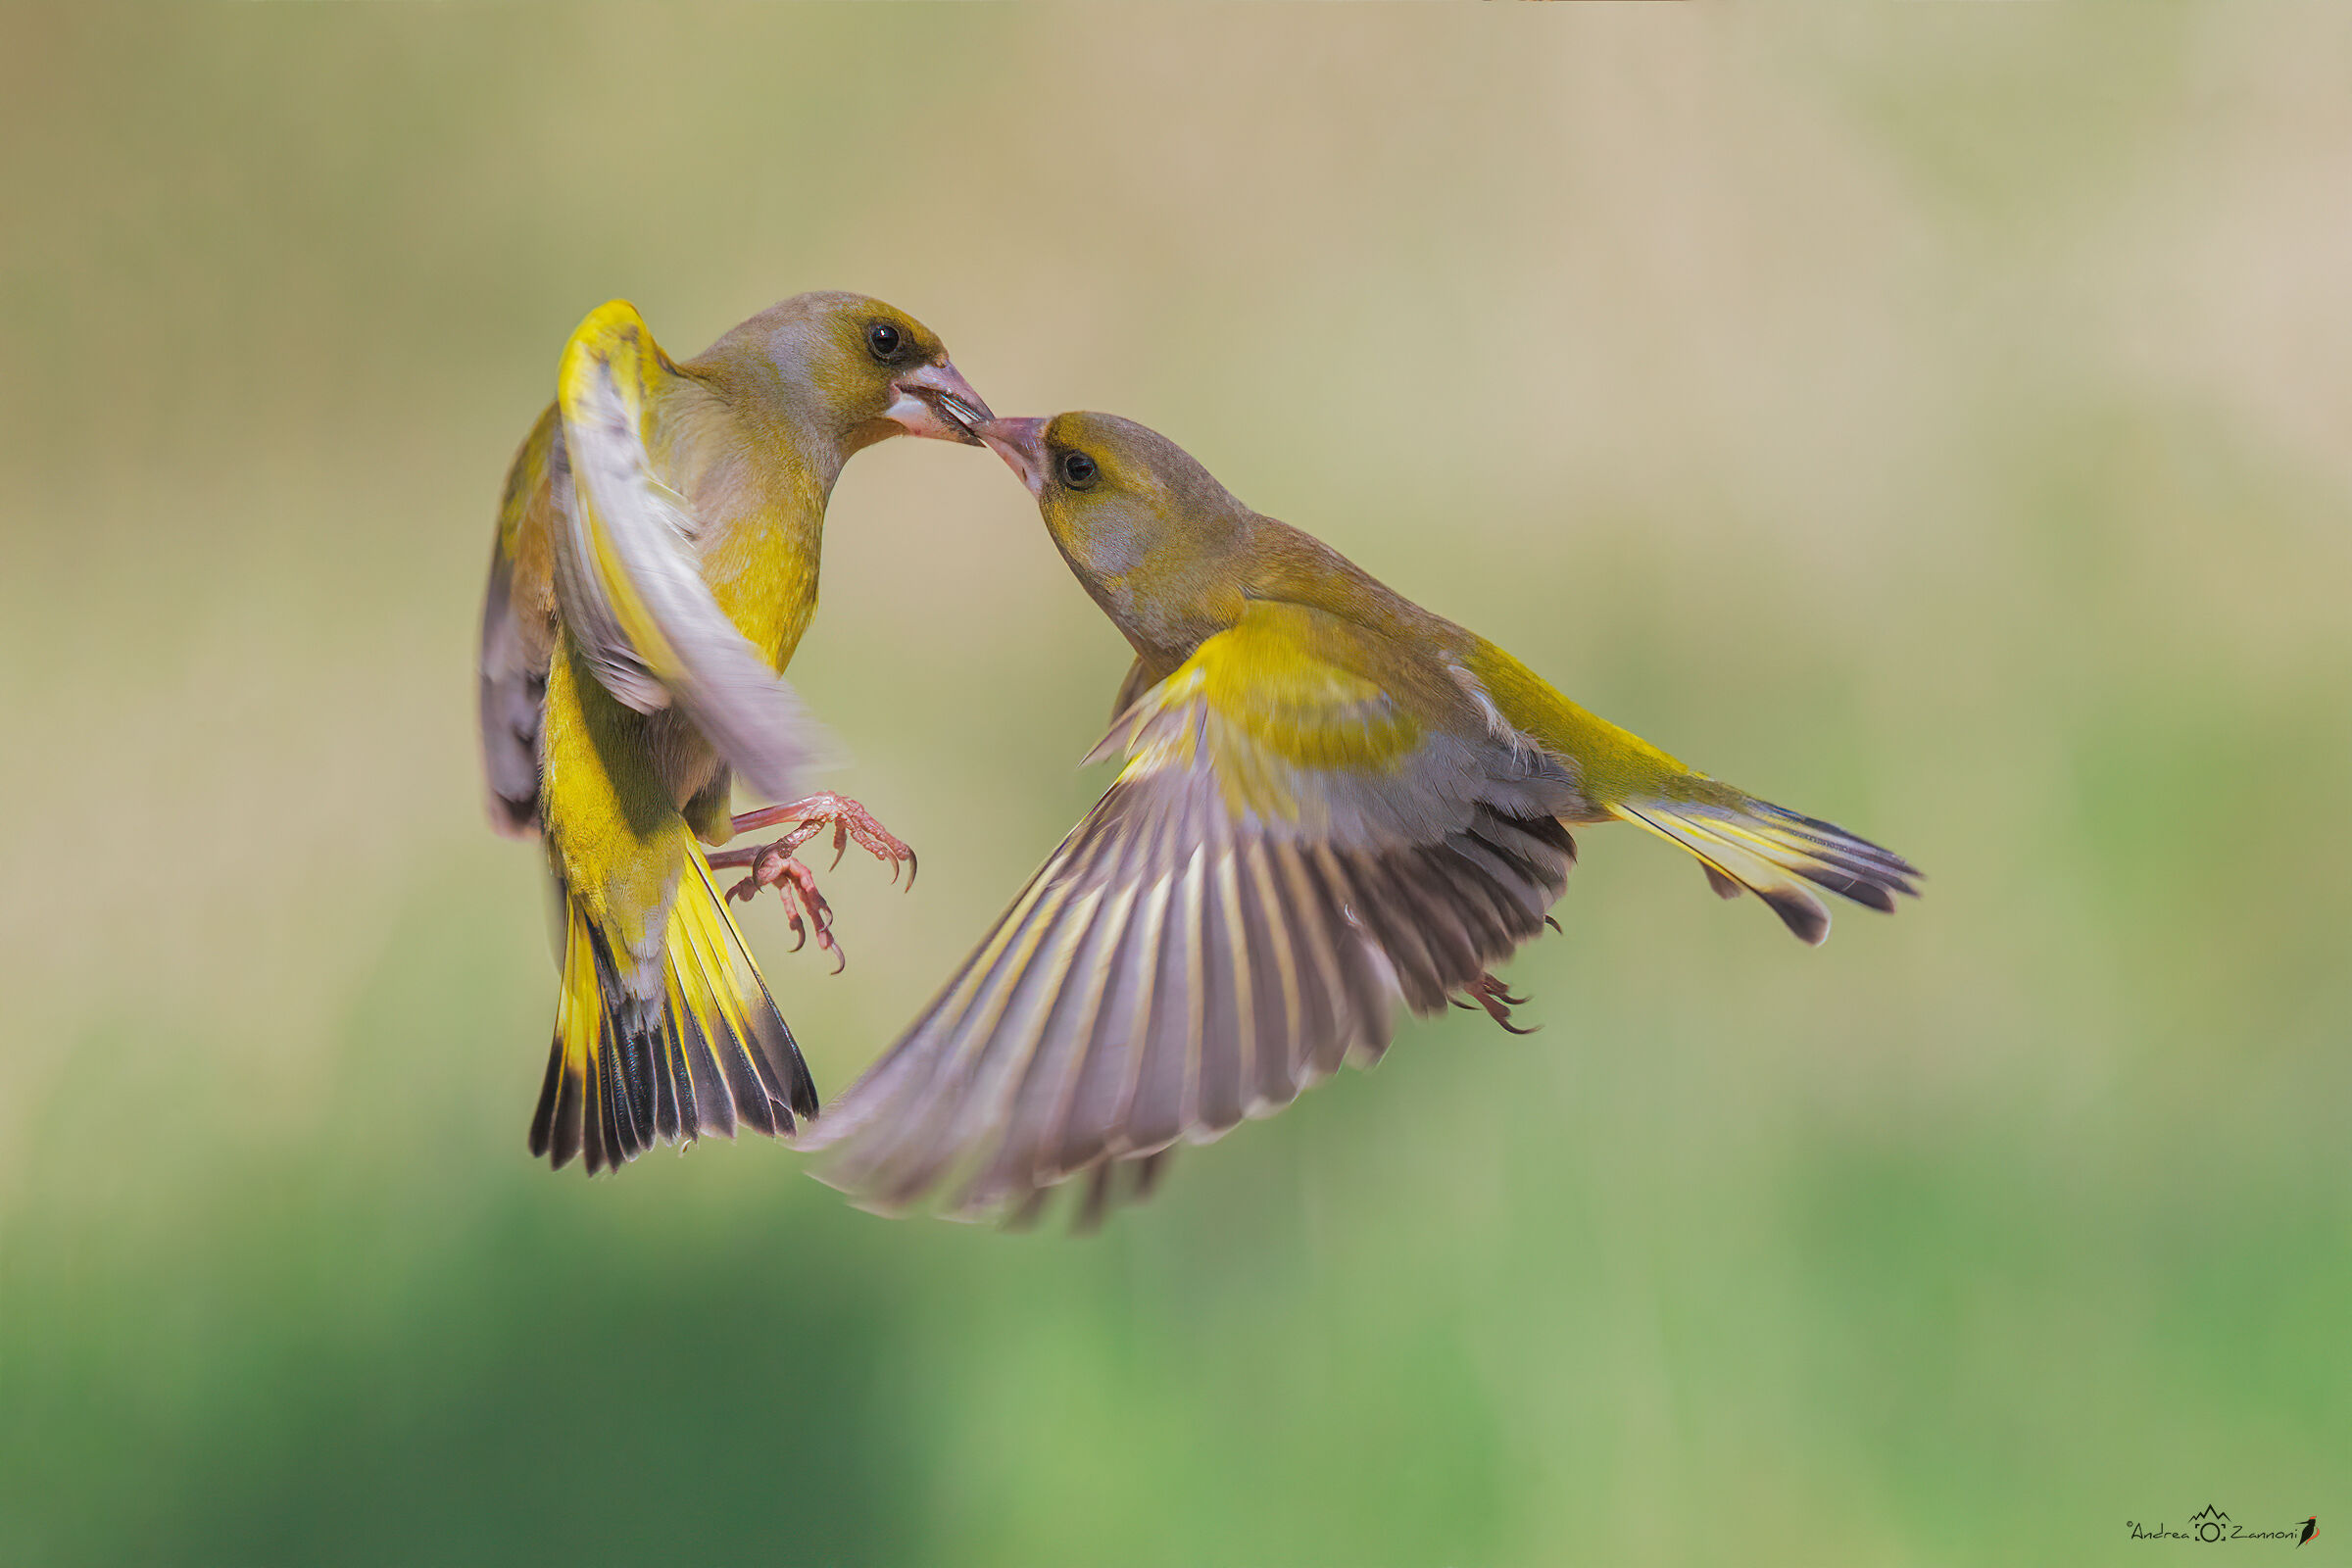 Squabble between greenfinches...